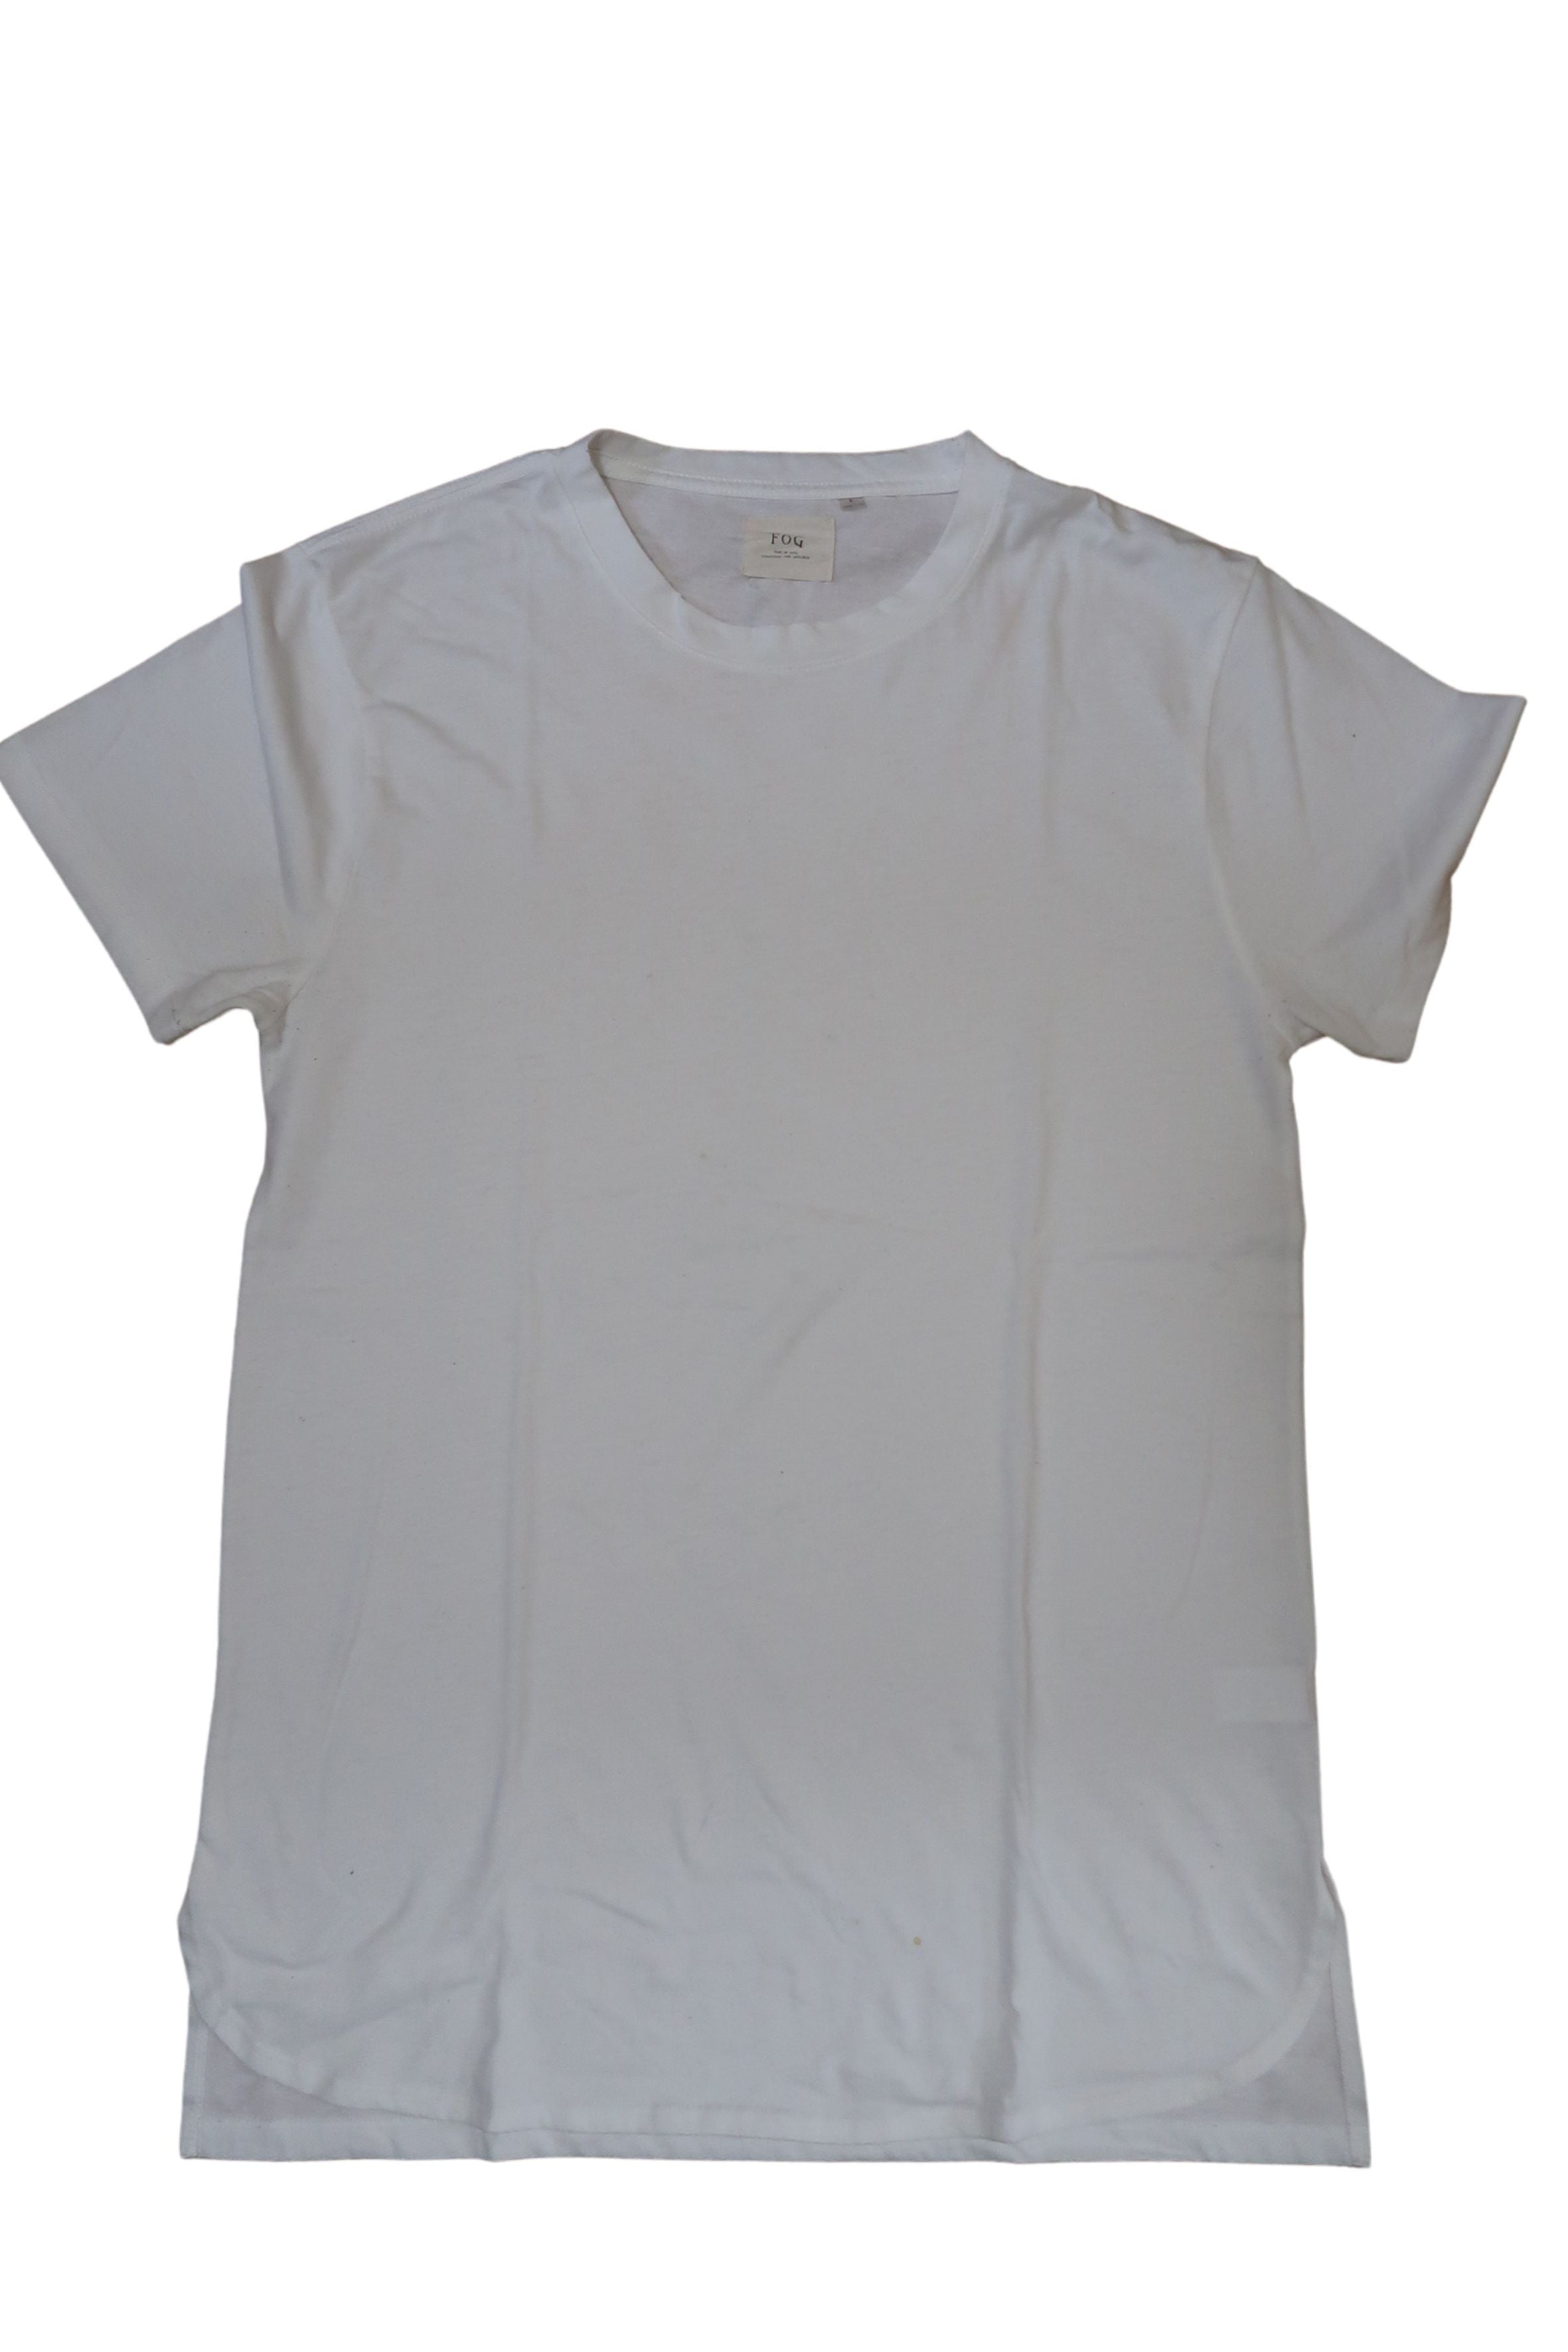 FOG Fear of God Collection One White Tshirt